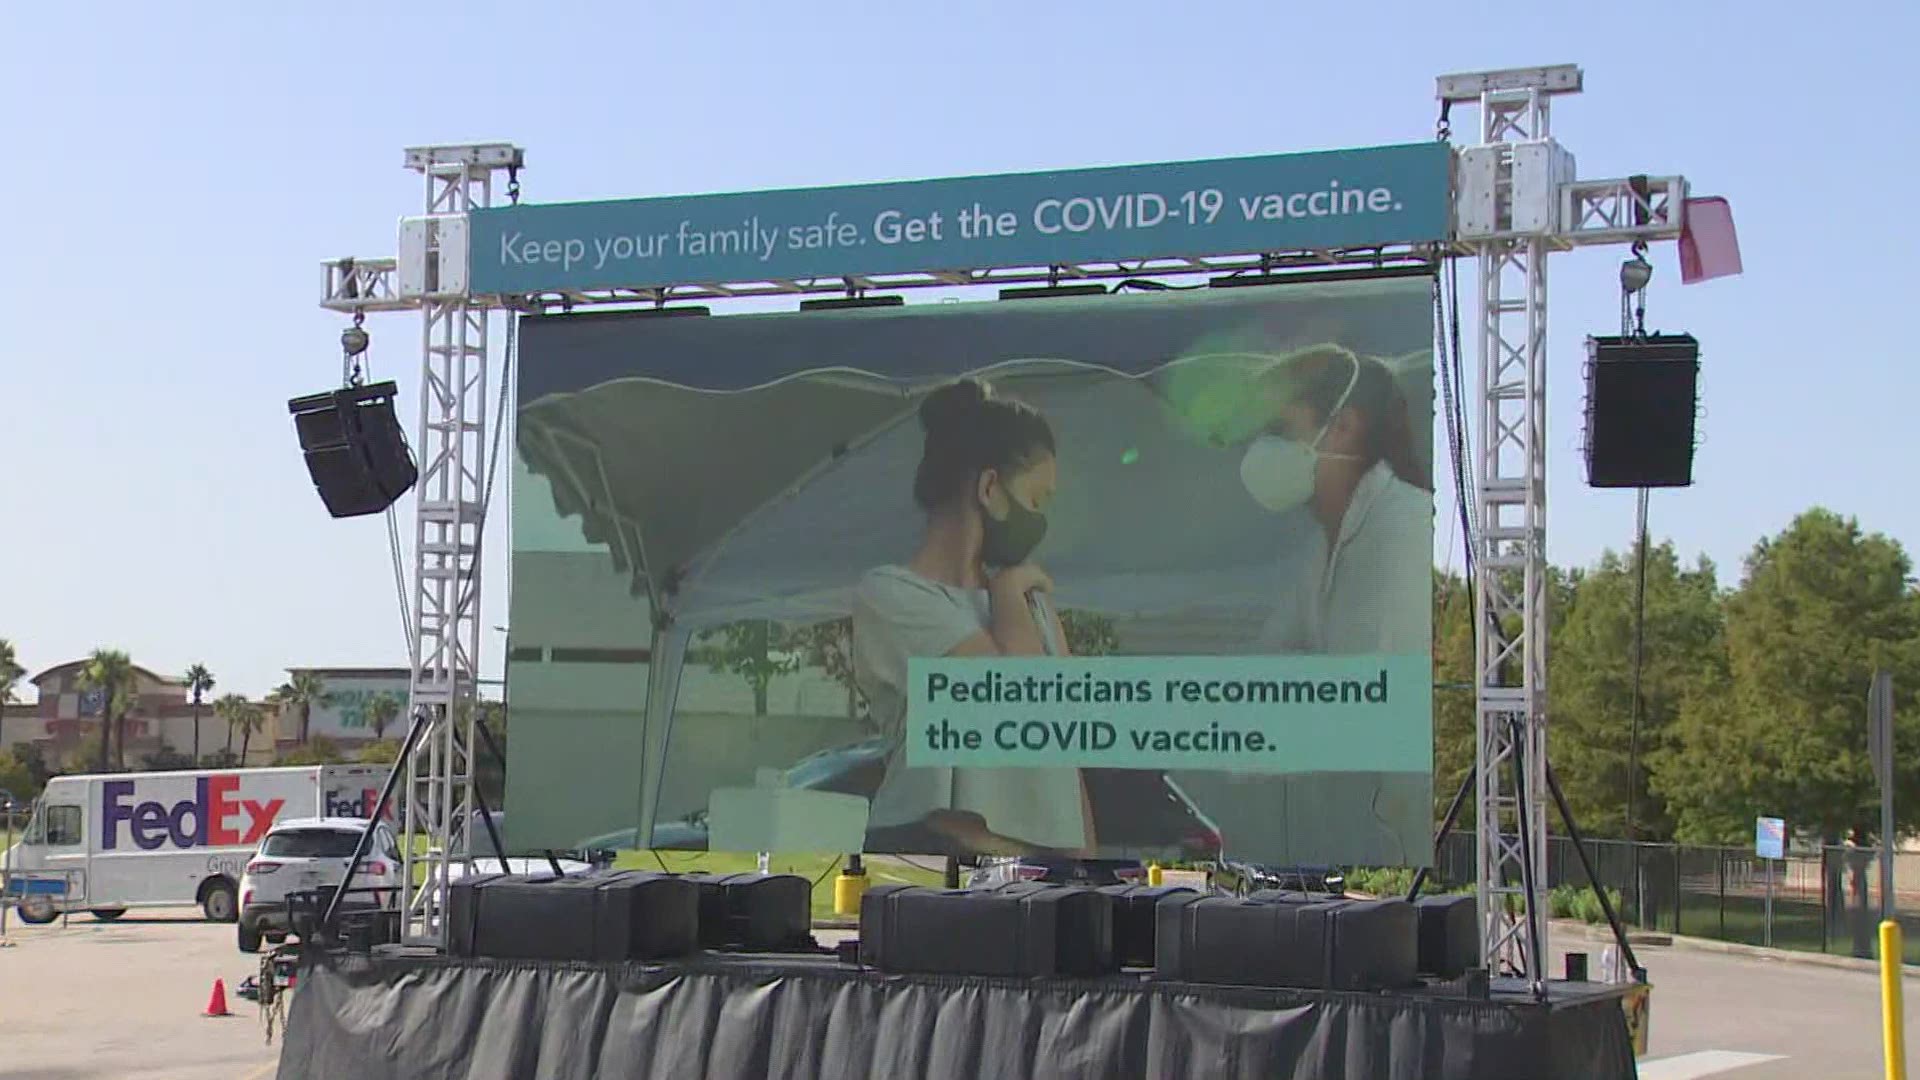 A 16-foot-tall video wall playing PSAs urges families to vaccinate their kids 12 and older ahead of the new school year.